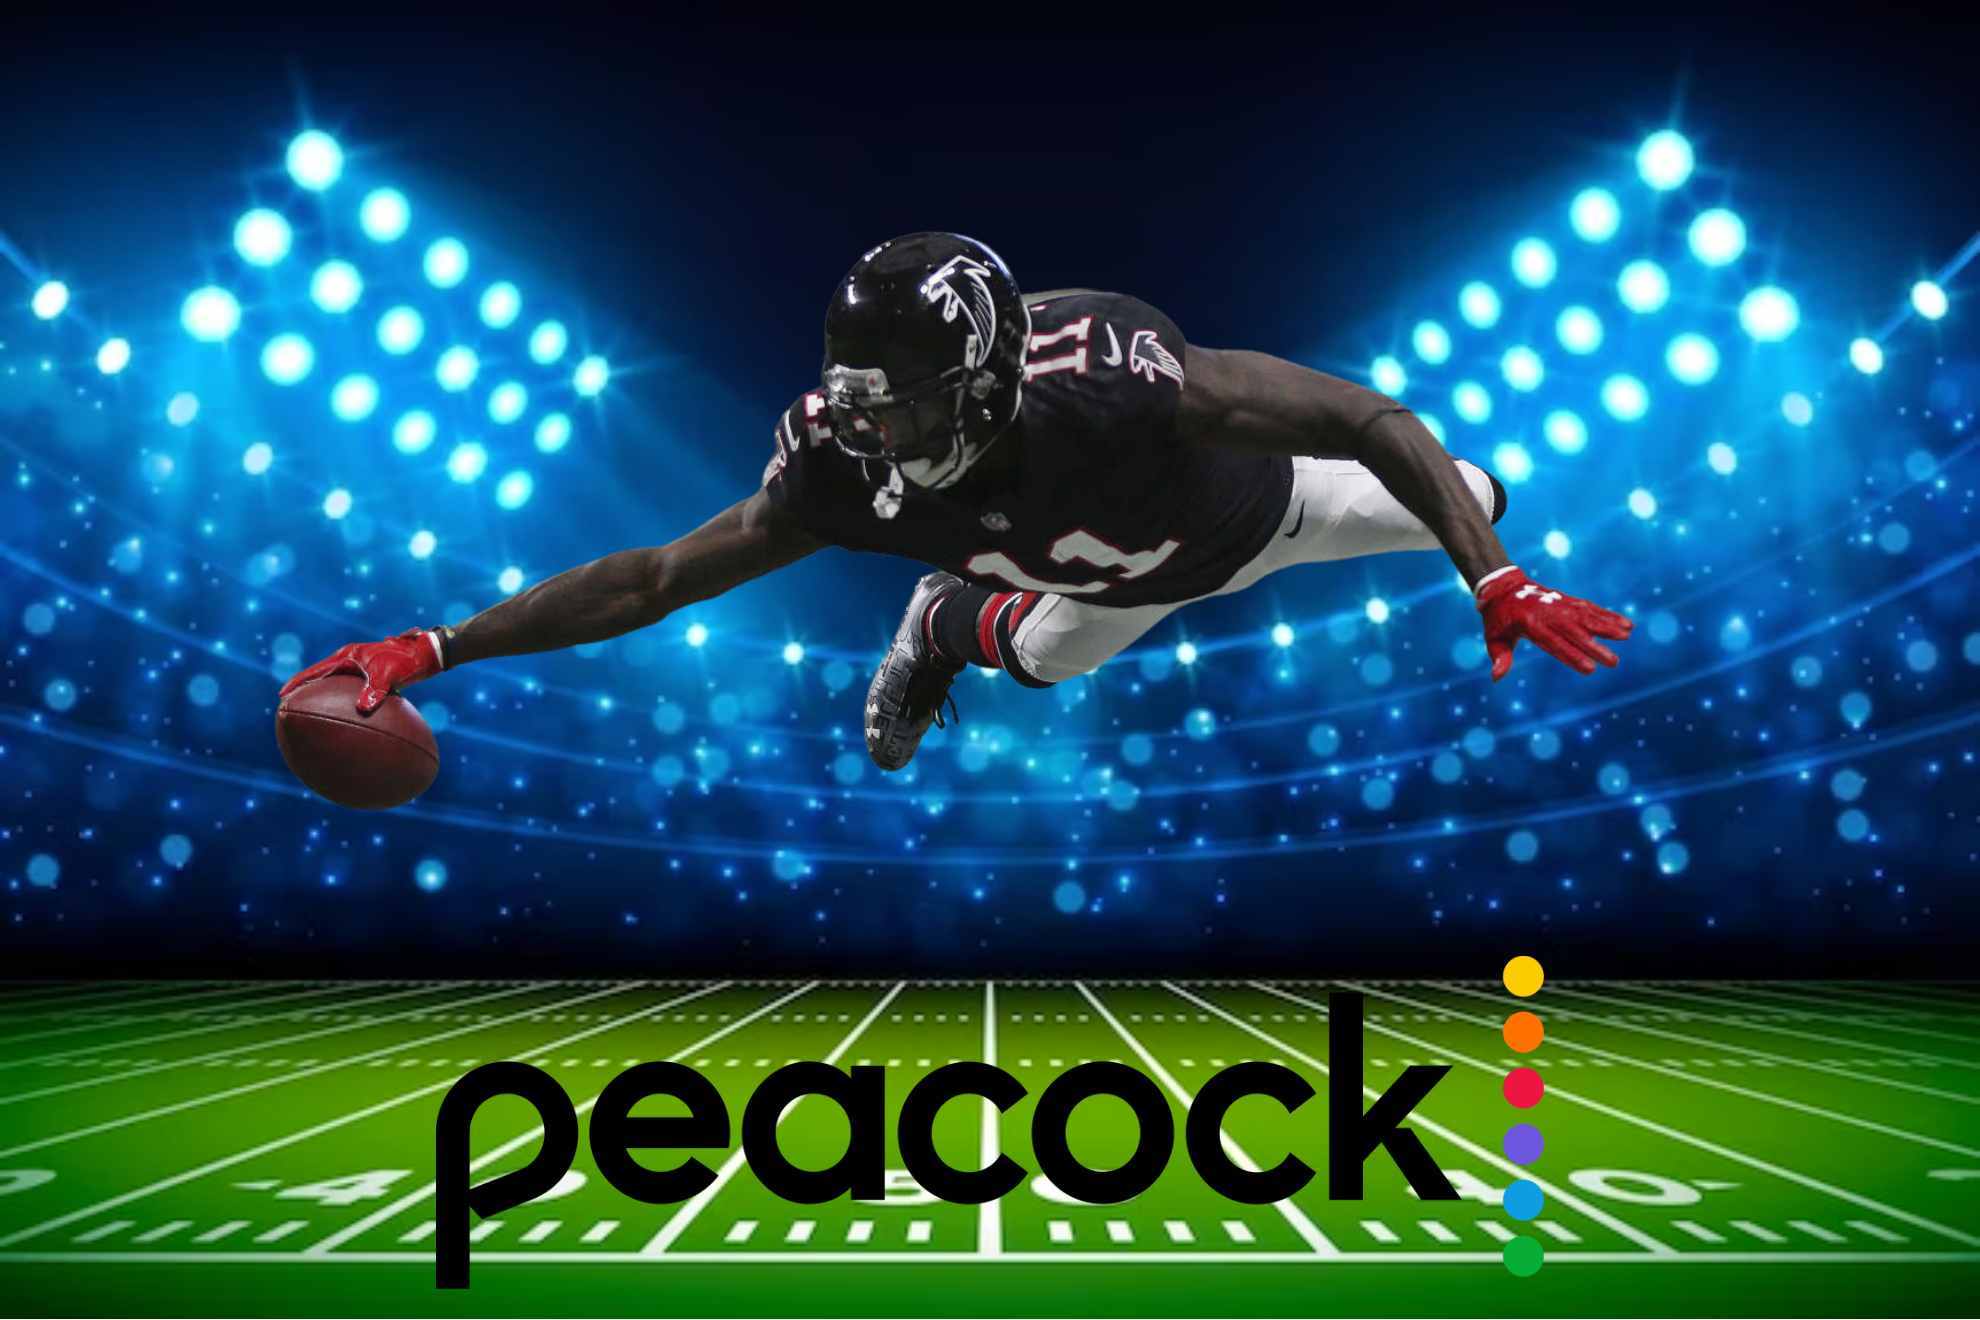 will peacock have the super bowl 2022